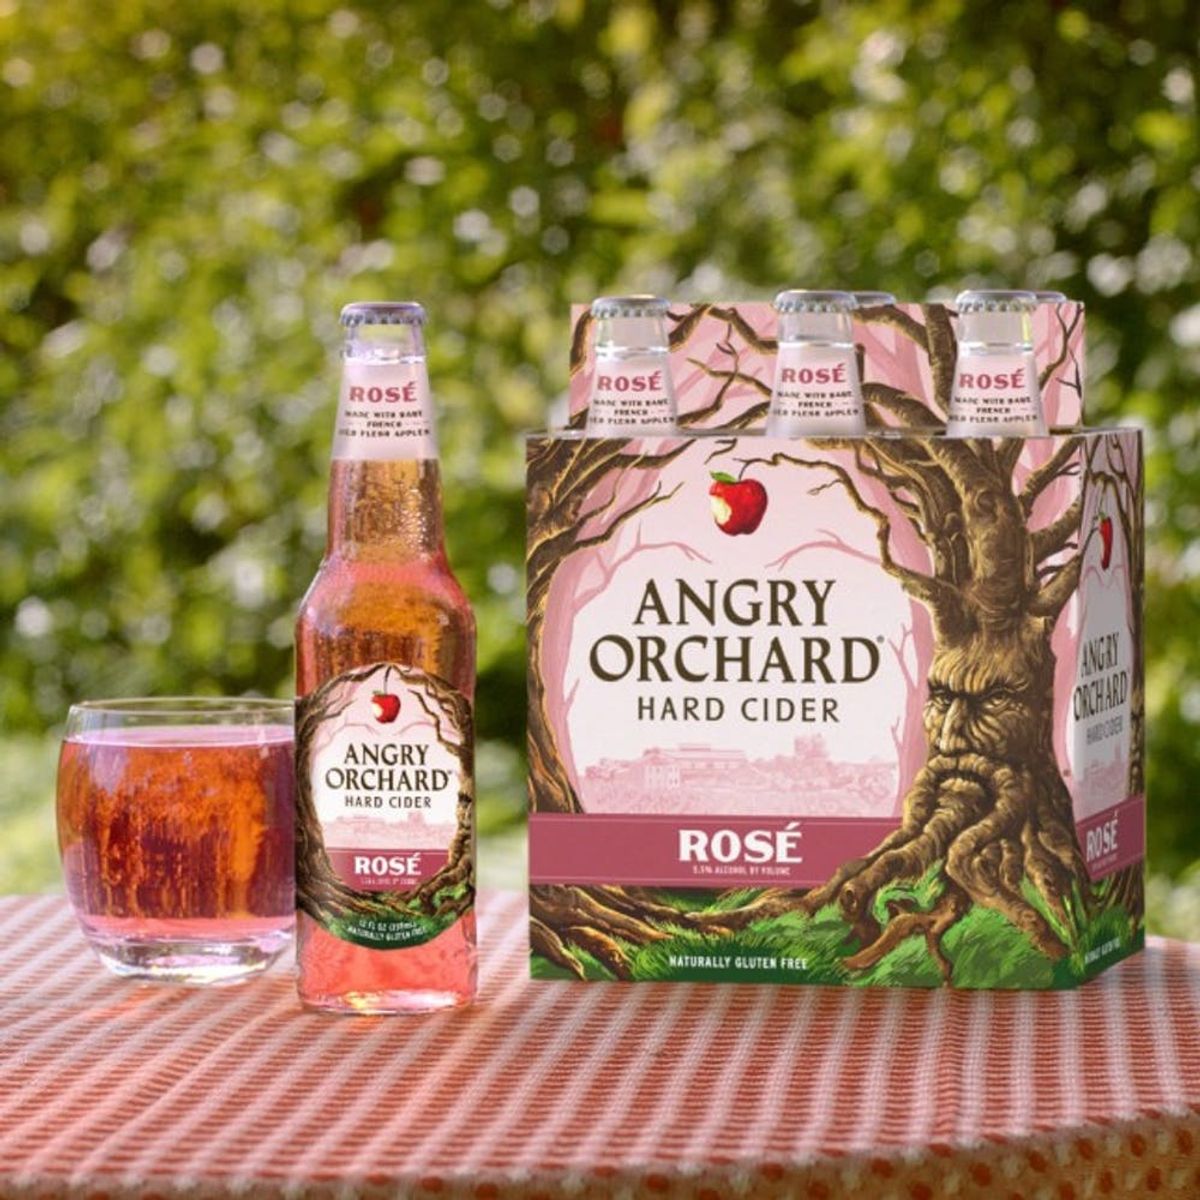 Angry Orchard’s New Rosé Cider Will Make You Feel Princess-y